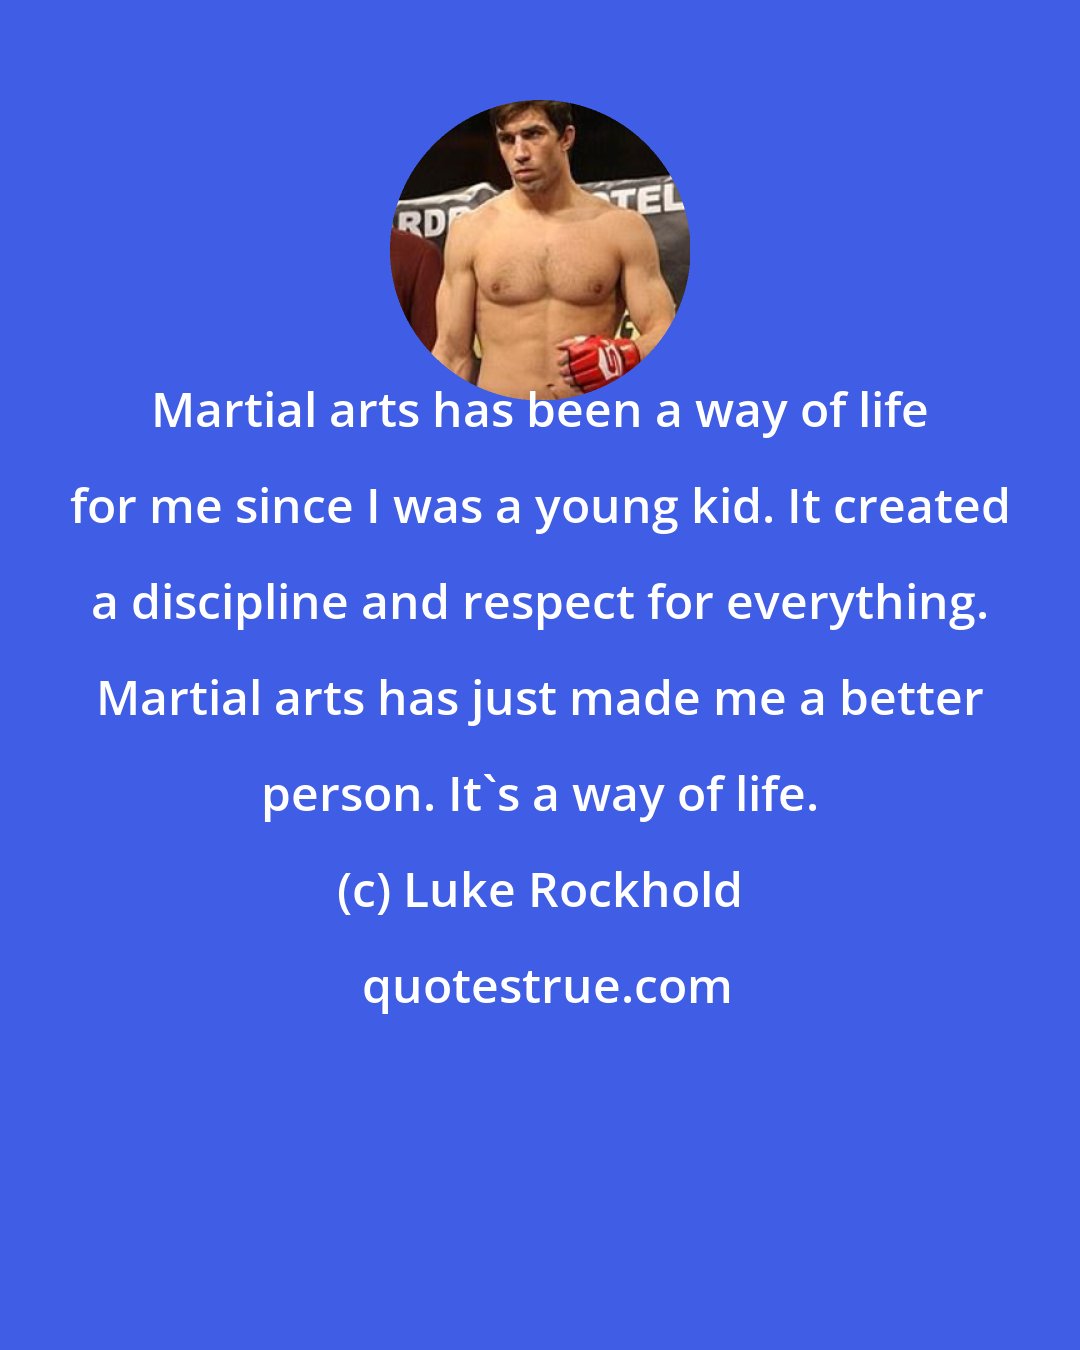 Luke Rockhold: Martial arts has been a way of life for me since I was a young kid. It created a discipline and respect for everything. Martial arts has just made me a better person. It's a way of life.